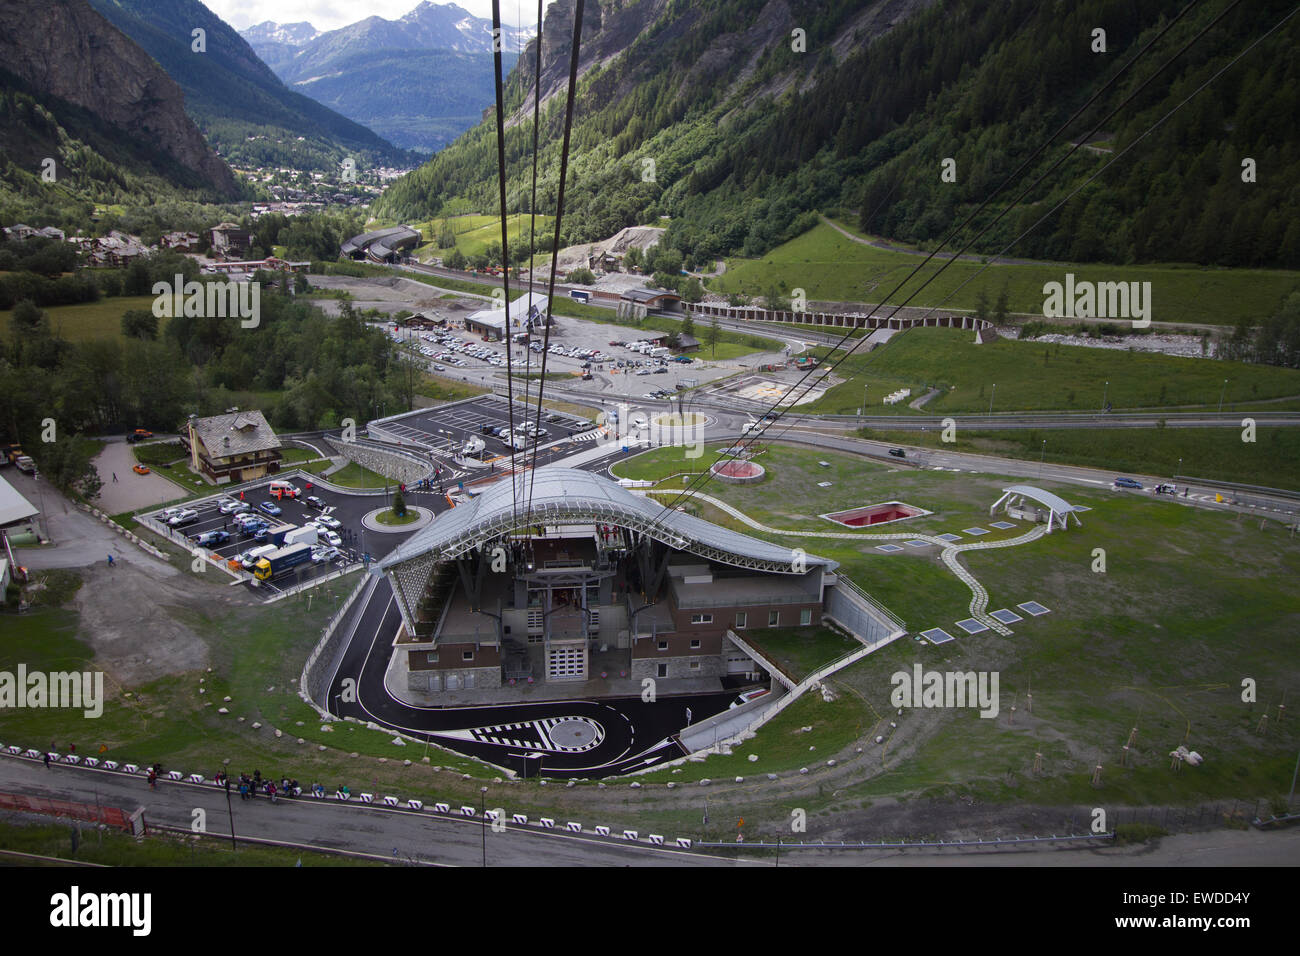 Courmayeur, Italy, 23rd June 2015. The departing station of the new Skyway cable car that connects the city of Courmayeur to Pointe Helbronner (3,466 m) in the Mont Blanc massif. Stock Photo